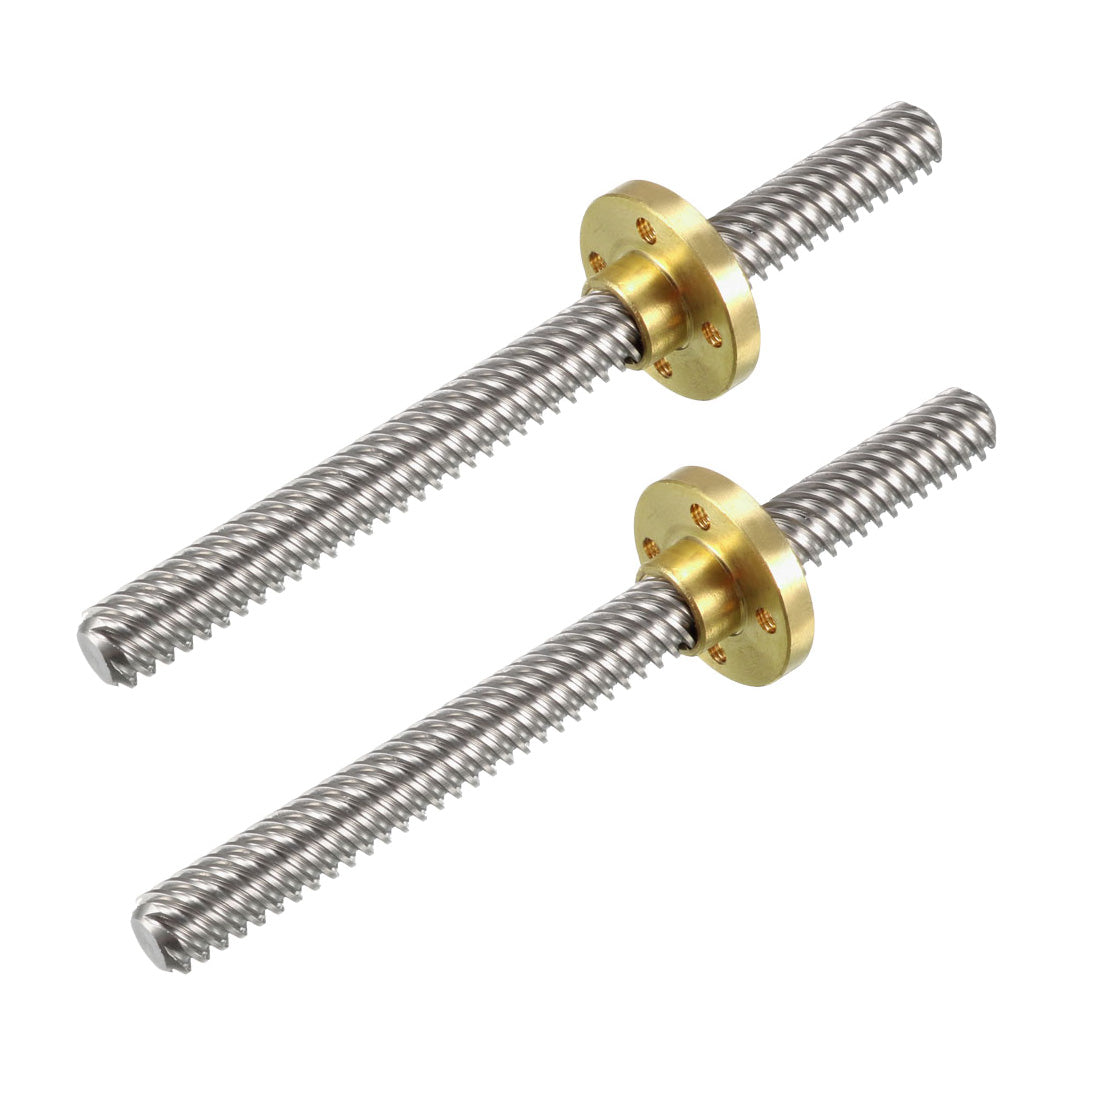 uxcell Uxcell 2PCS 100mm T8 Pitch 2mm Lead 14mm Lead Screw Rod with Copper Nut for 3D Printer